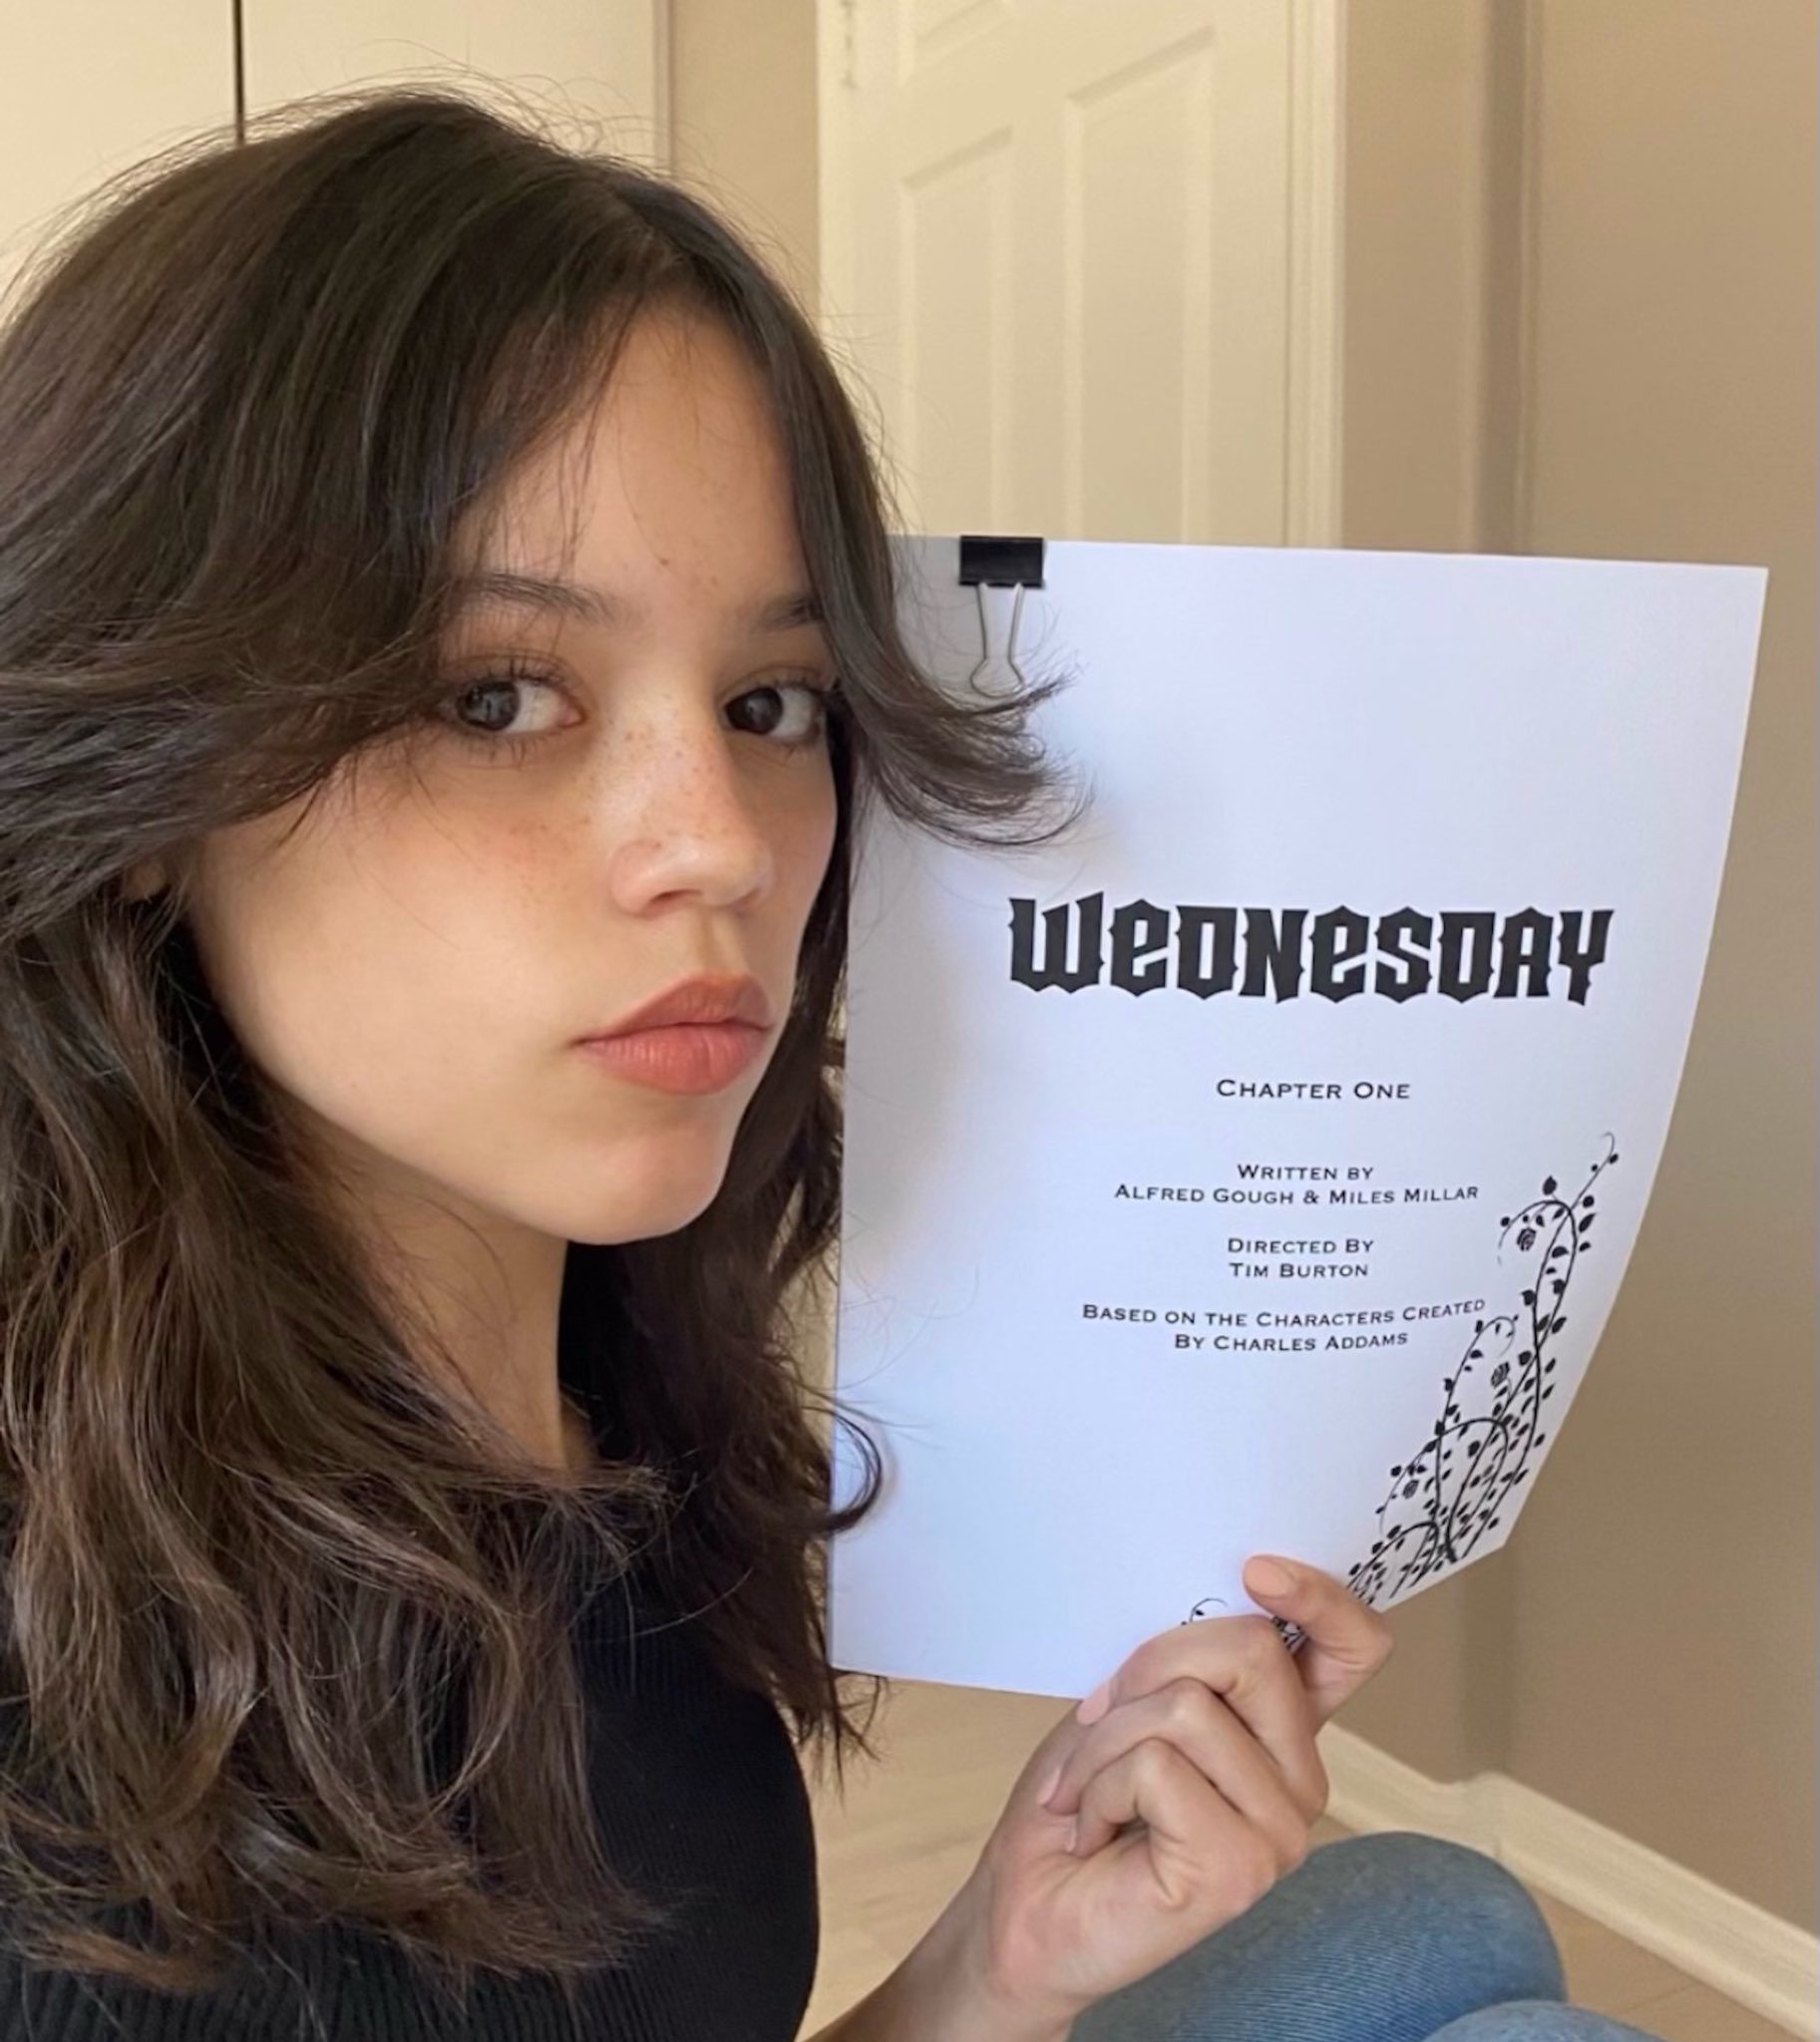 Netflix casts Jenna Ortega as lead for ‘Wednesday’ live-action series